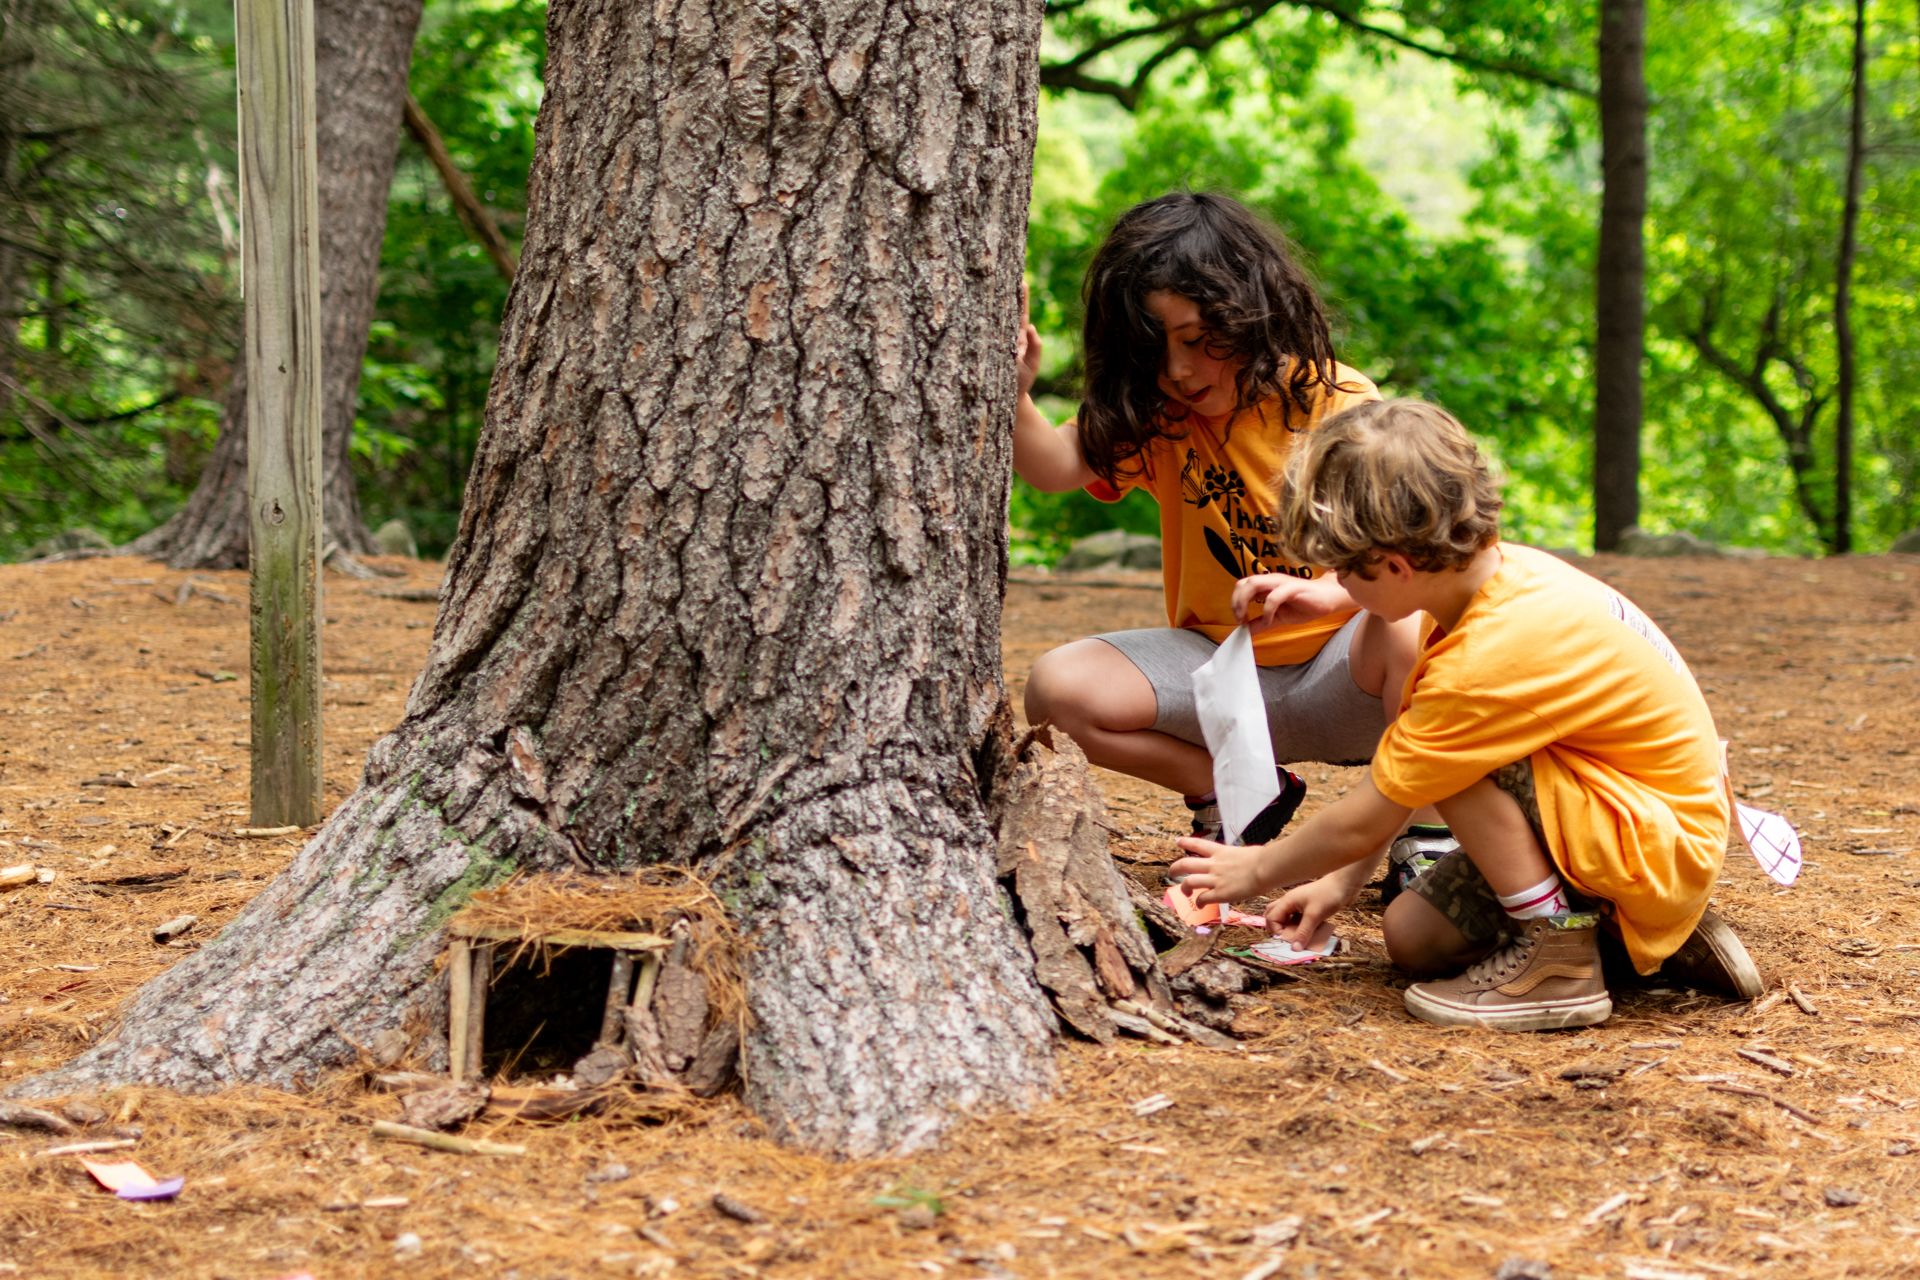 Two campers at Habitat Nature Camp kneeling at the base of a tree, using twigs and pine needles to construct a tiny "gnome home"